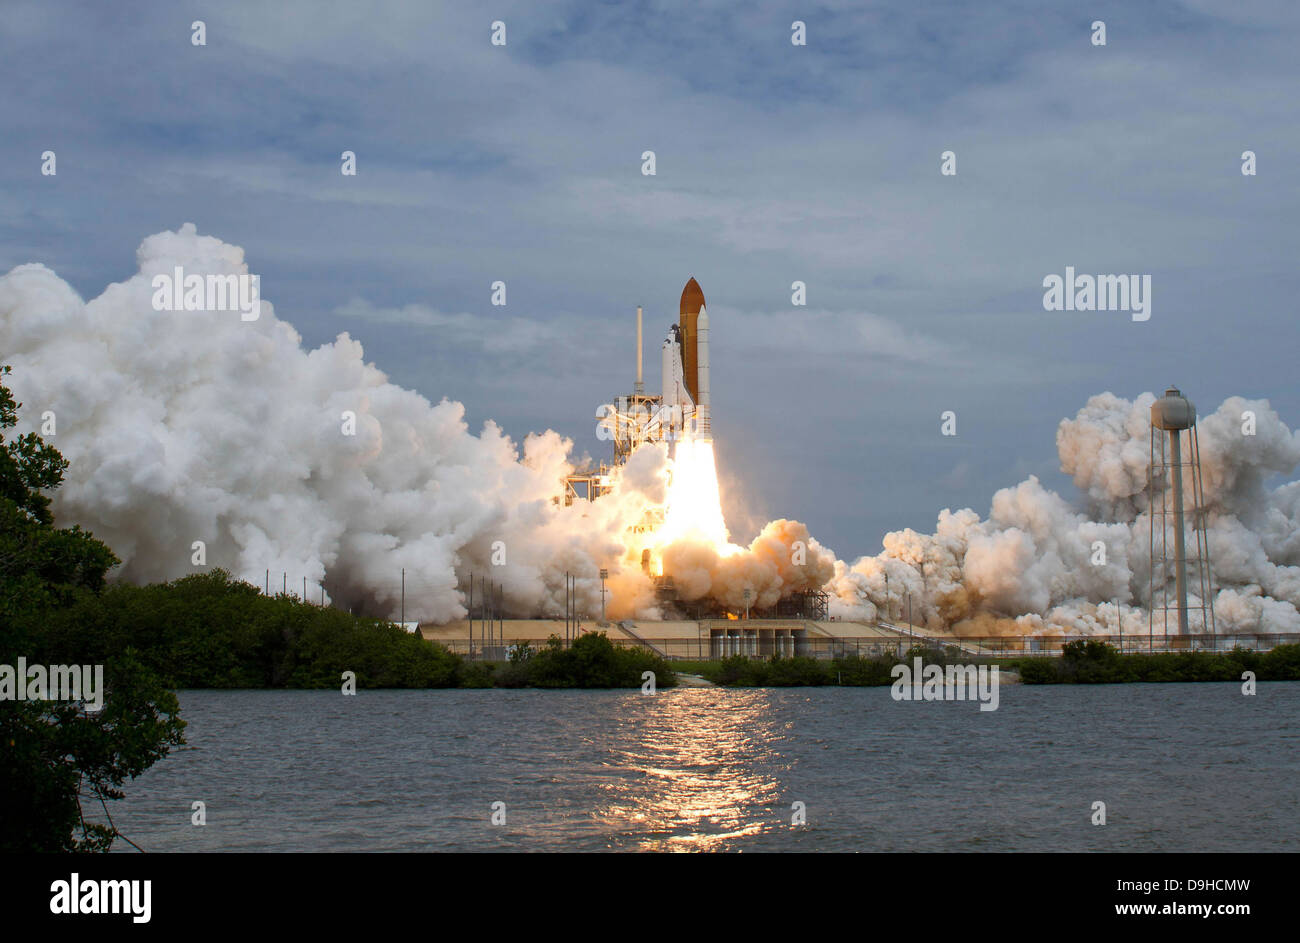 Space shuttle Atlantis lifts off from the Kennedy Space Center, Florida. Stock Photo